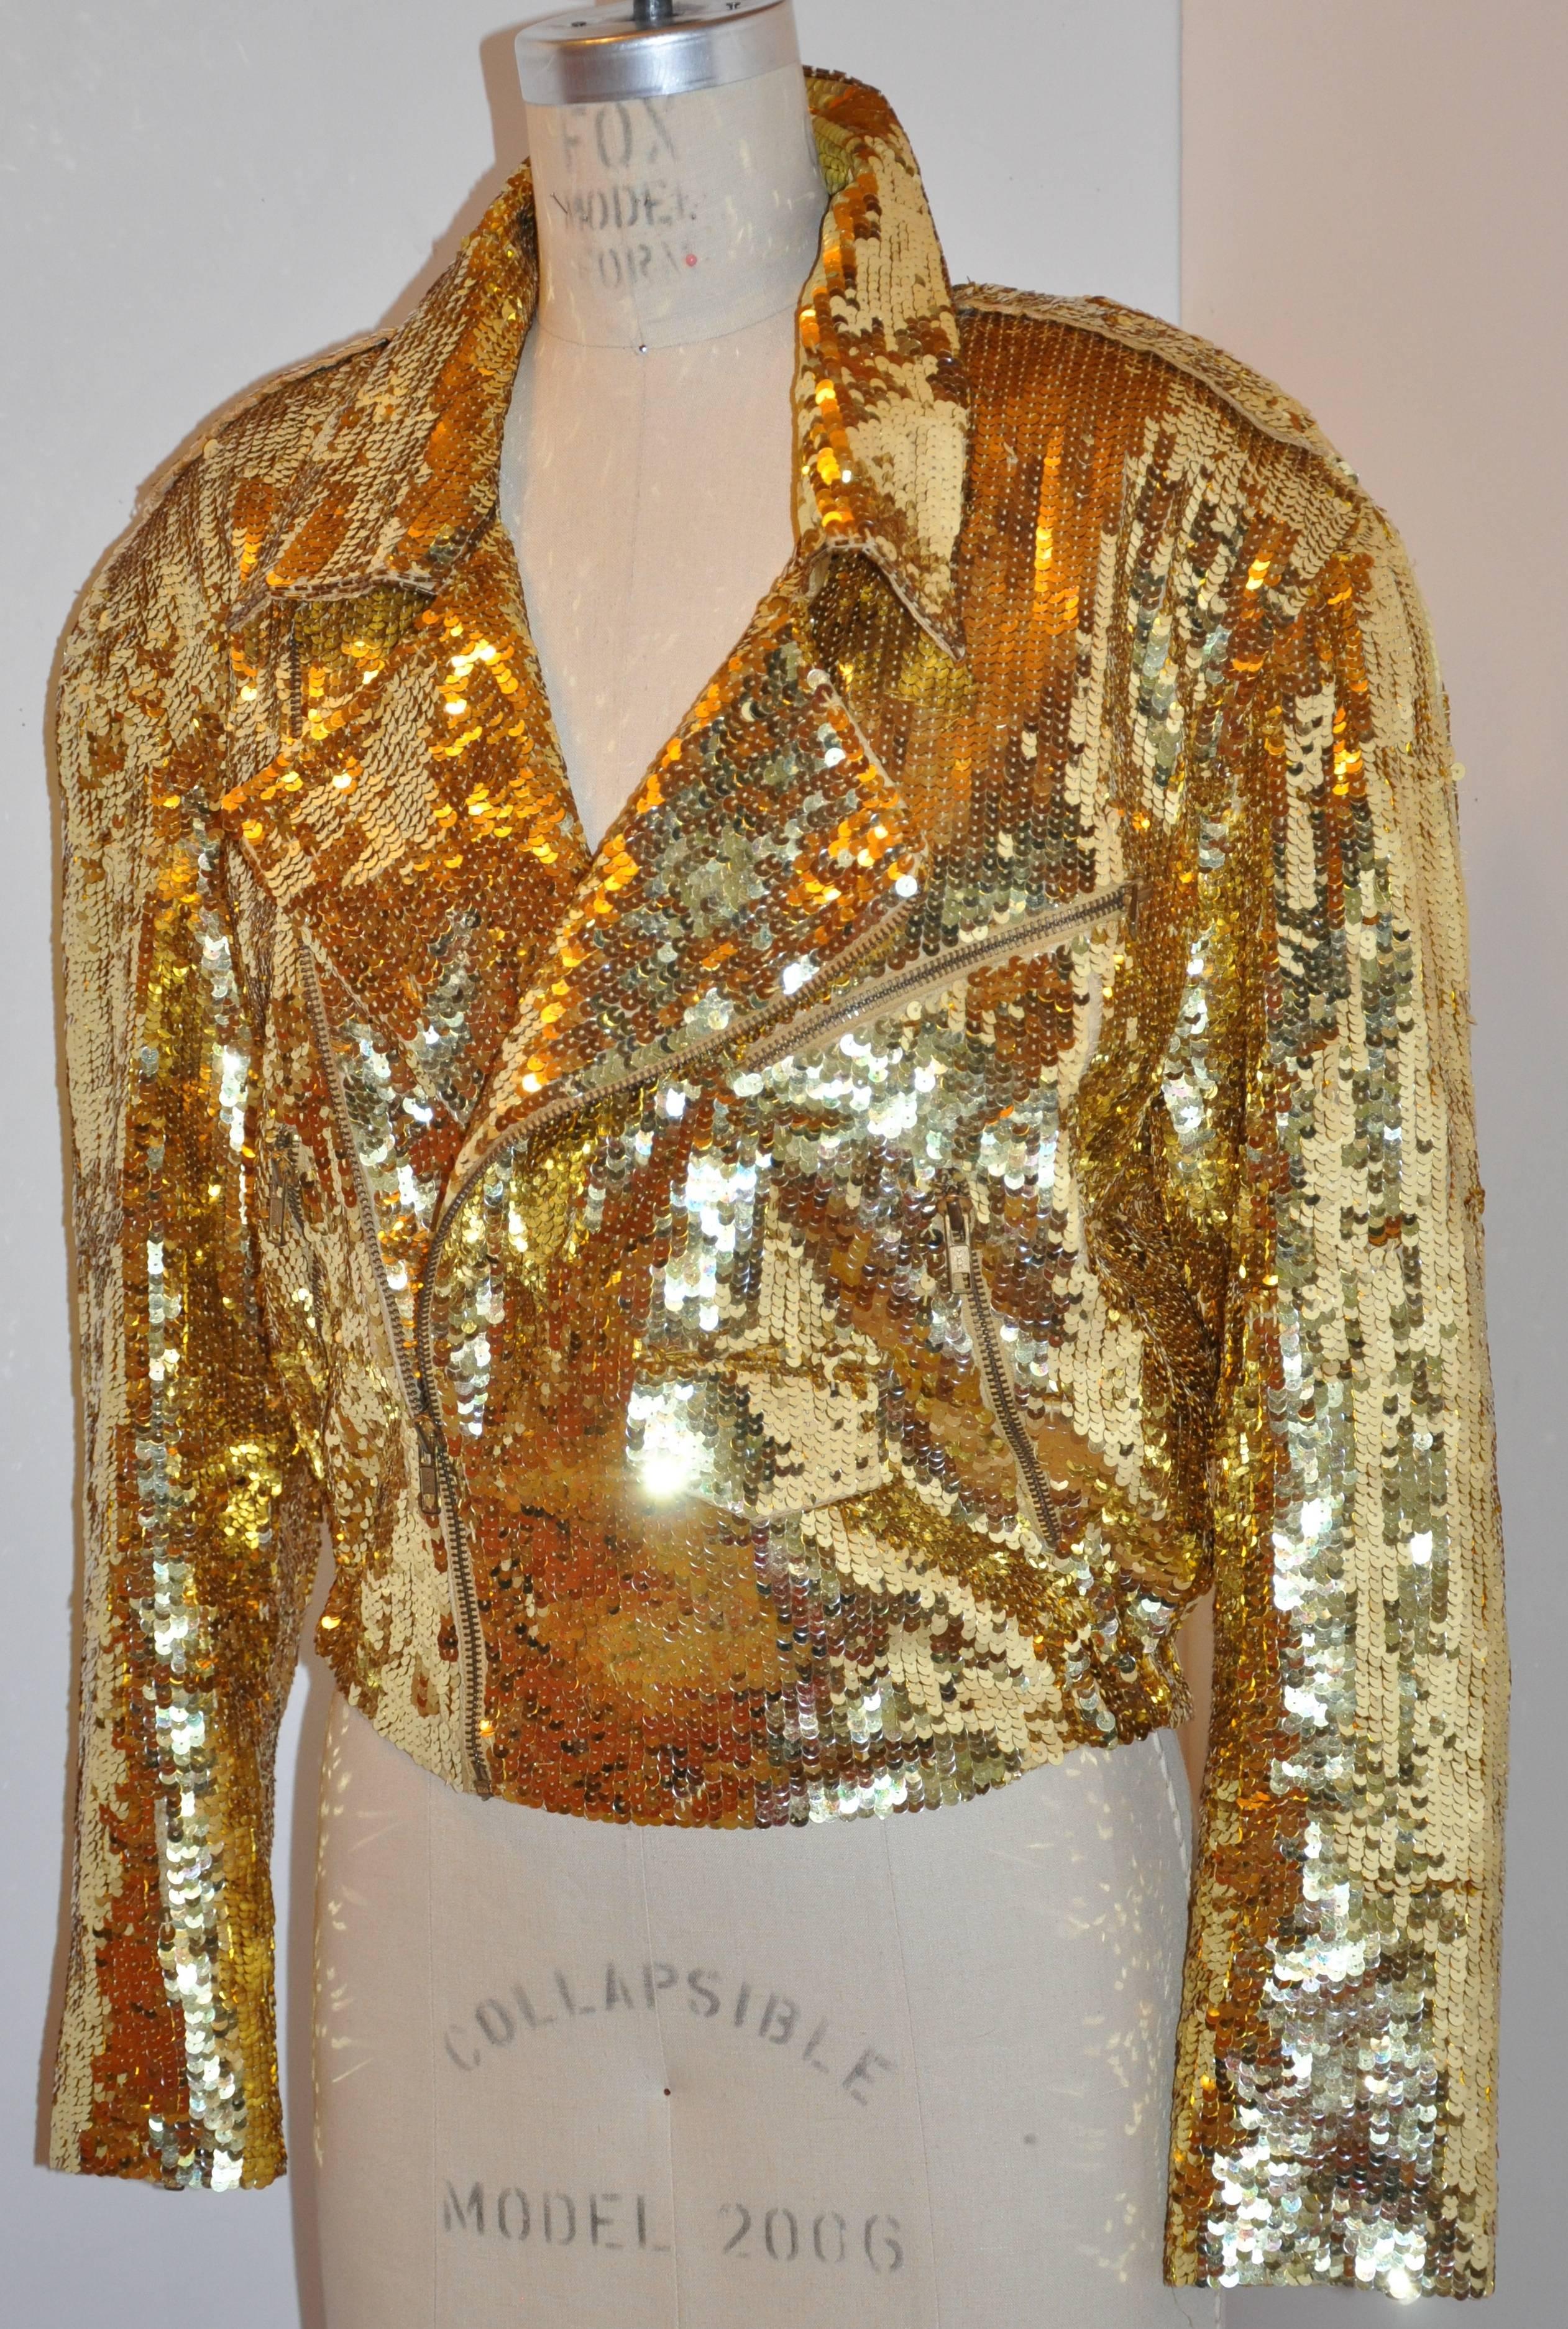      The famed Iconic Lillie Rubin of Park Avenue golden metallic sequin zipper motorcycle jacket features a front zipper as well as zippered front pockets and cuffs. The sequin collar is finished with micro bugle beads on the edge. The length